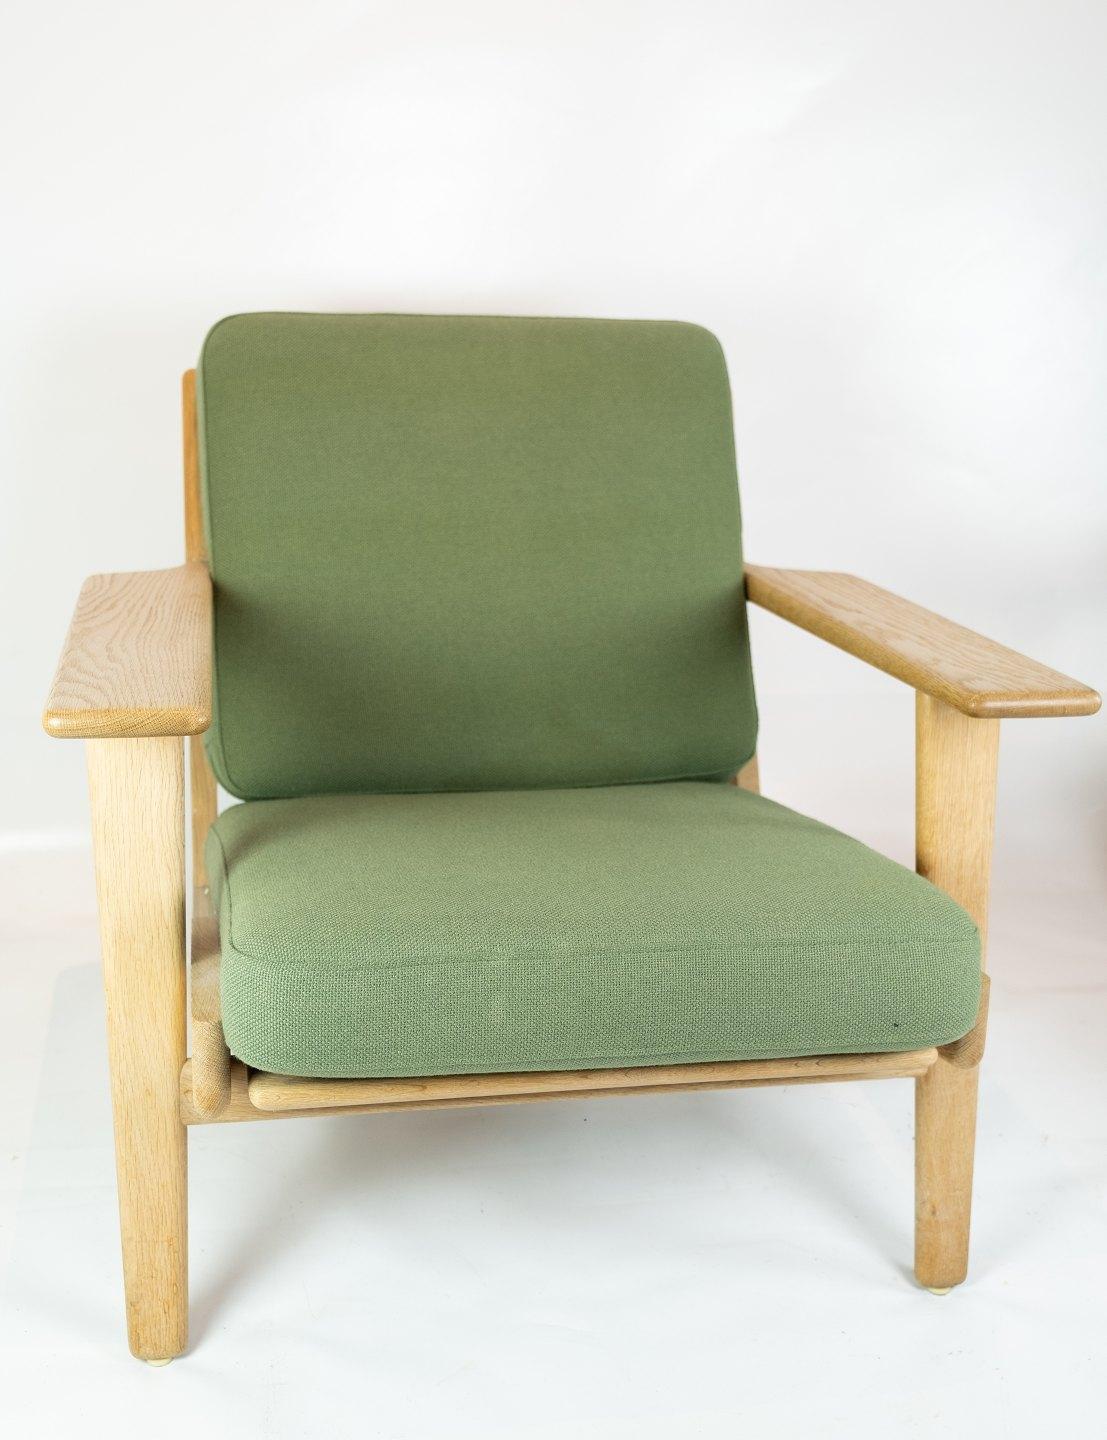 A pair of armchairs, model GE290, designed by Hans J. Wegner and manufactured by GETAMA in the 1960s. The chairs are of oak and cushions of light green wool.
   